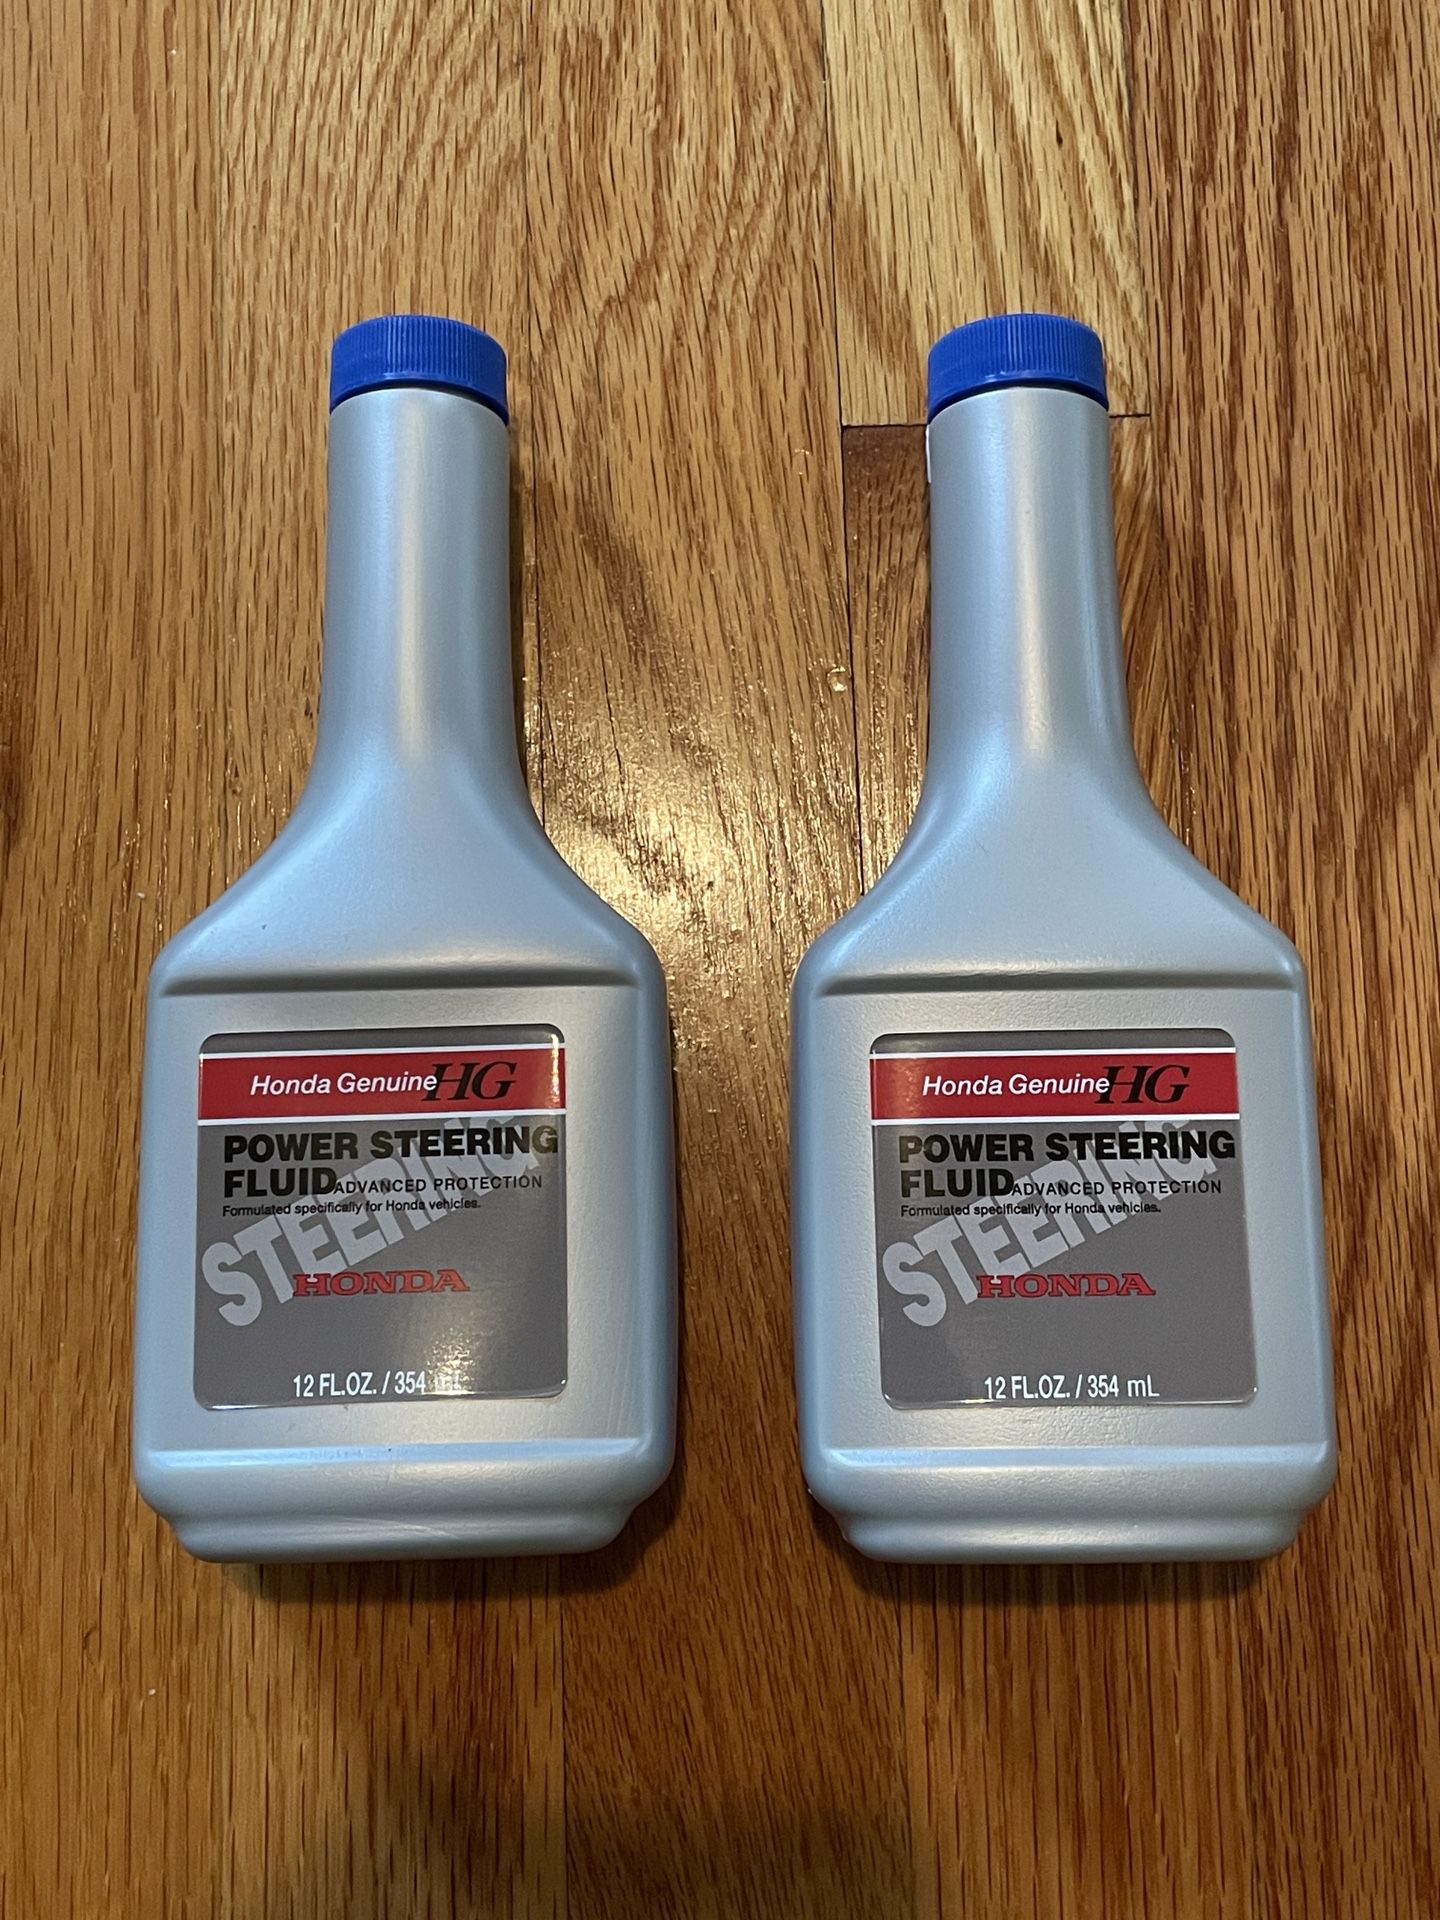 2x Honda Genuine Power Steering Fluid (08(contact info removed))